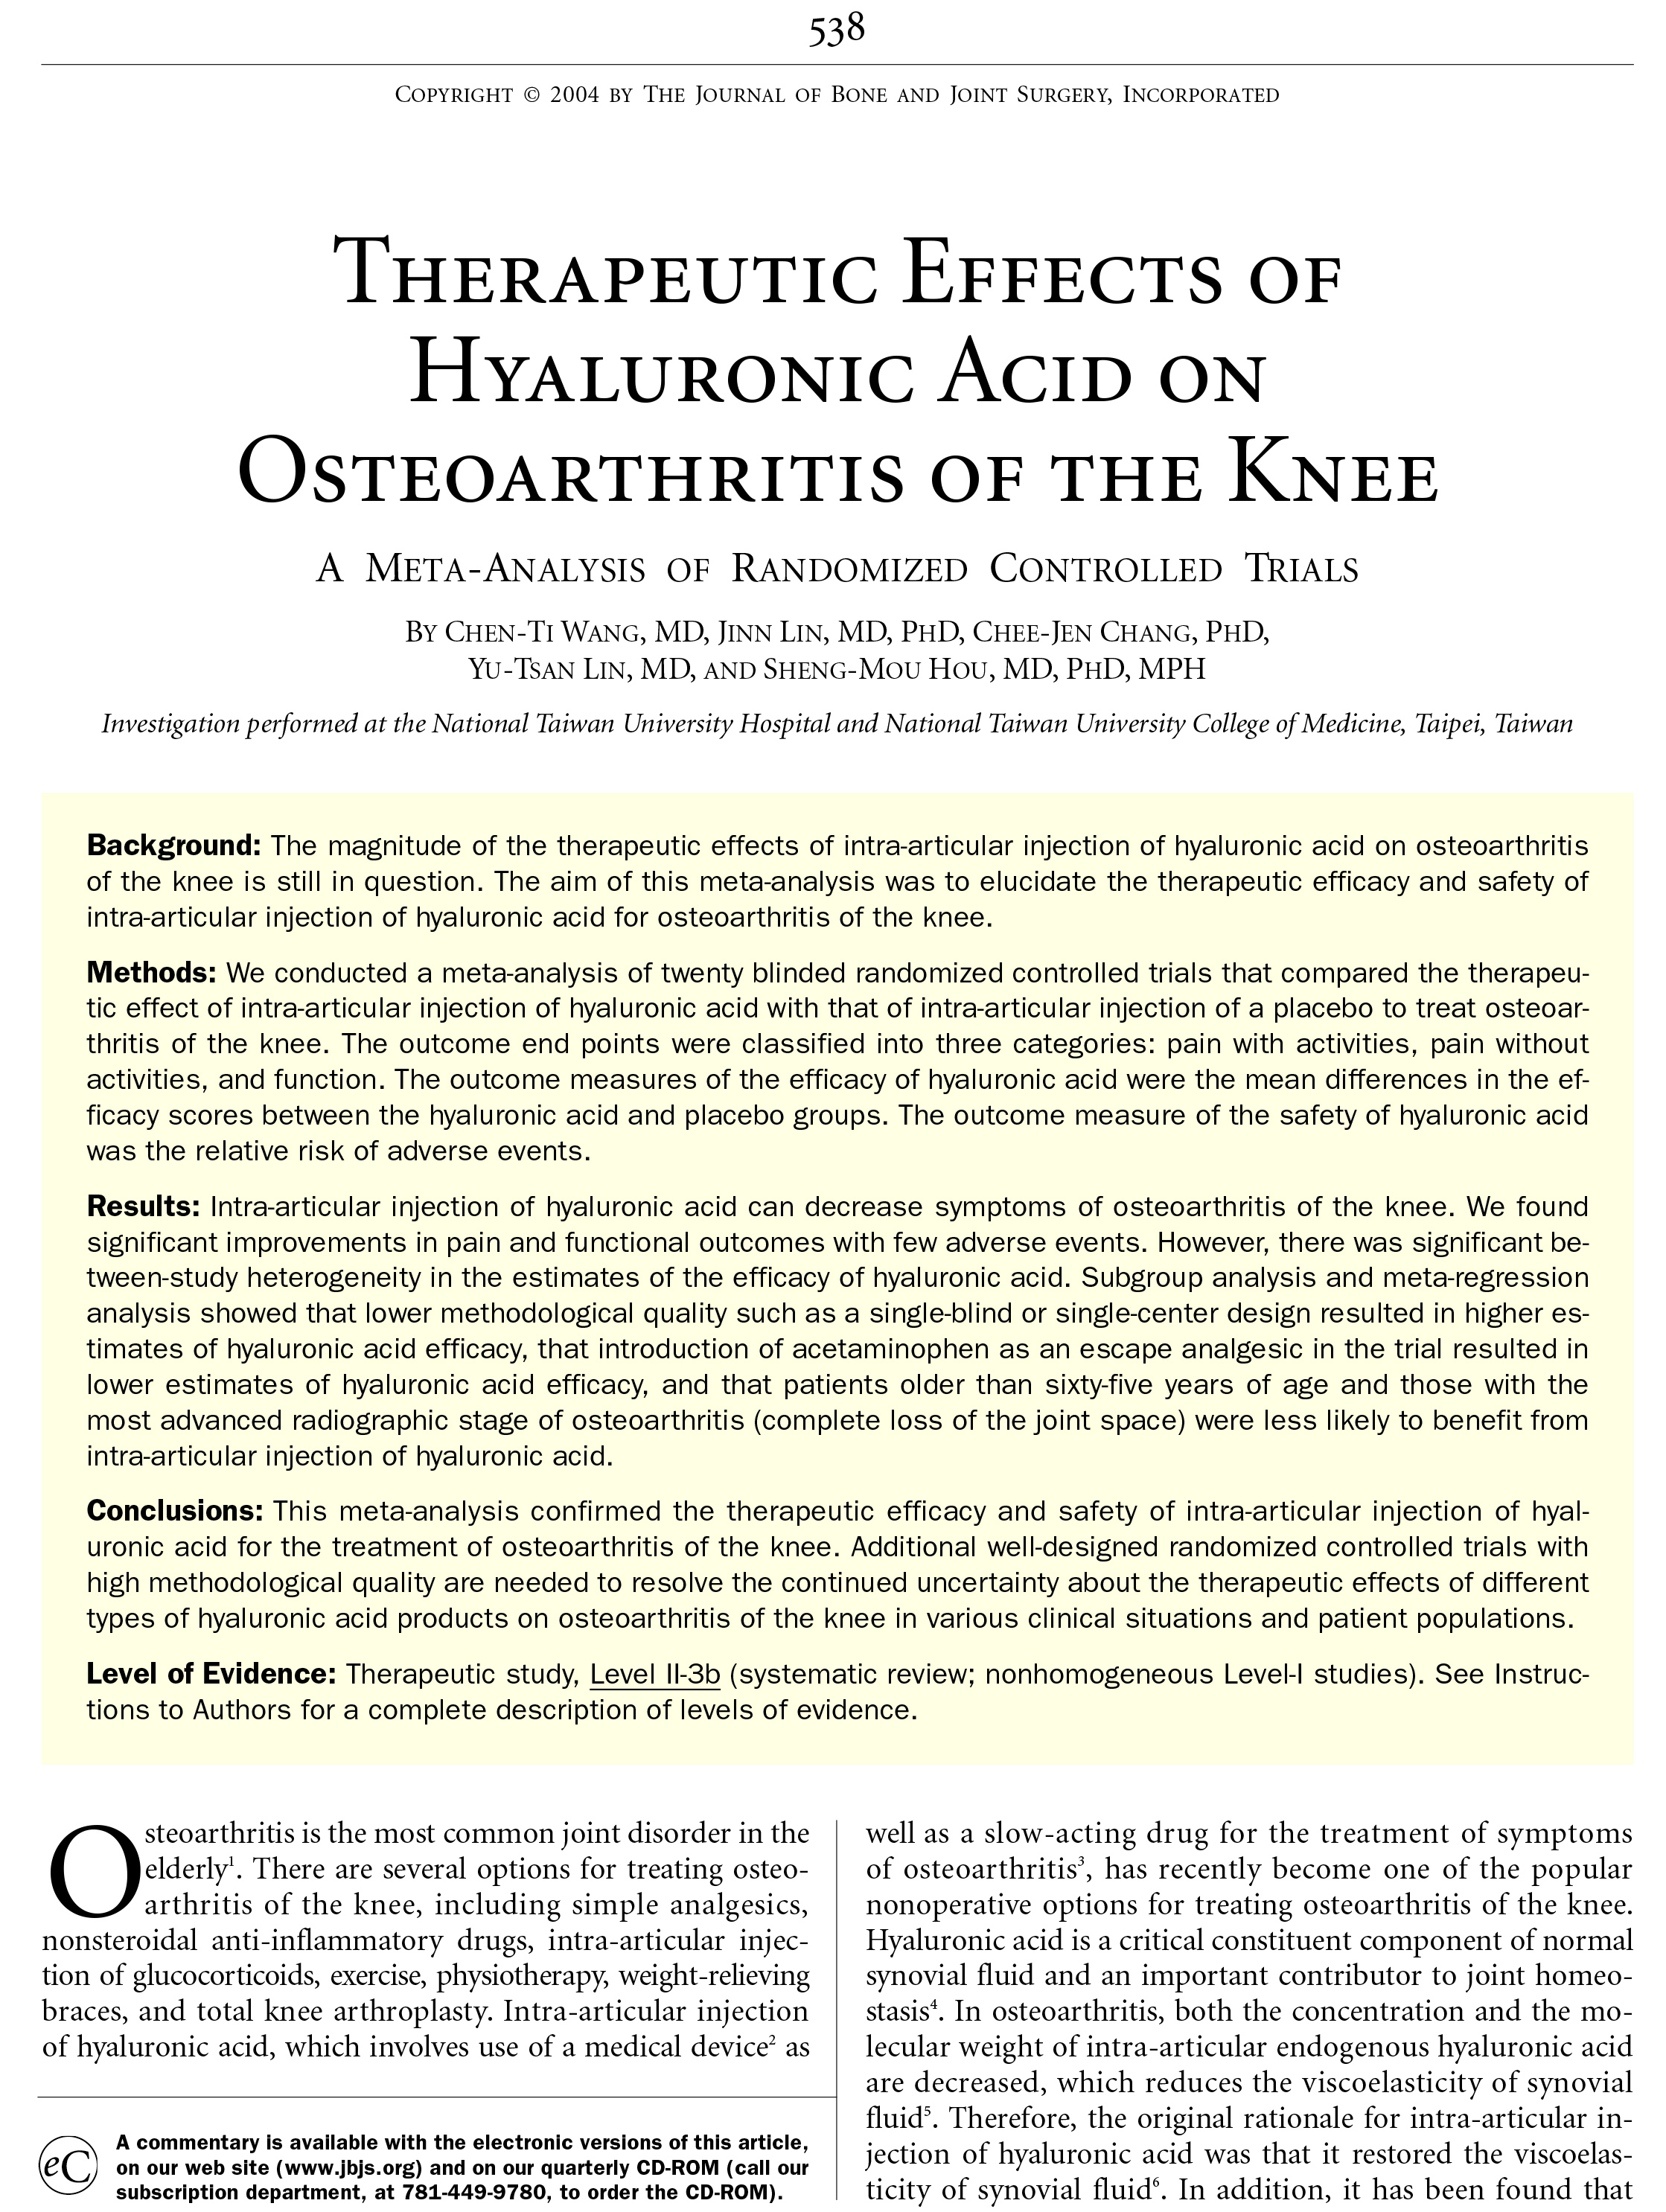 Therapeutic_effects_of_Hyaluronic_acid_on_Osteoarthritis_of_the_knee-1.jpg